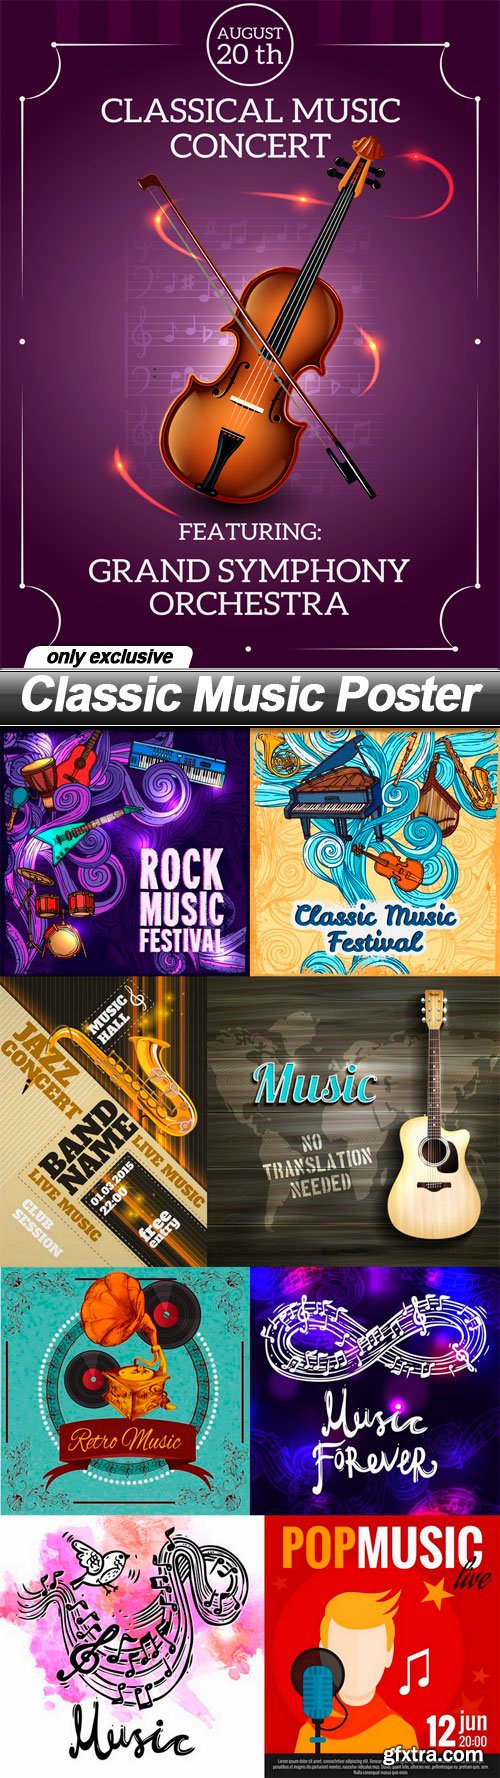 Classic Music Poster - 9 EPS